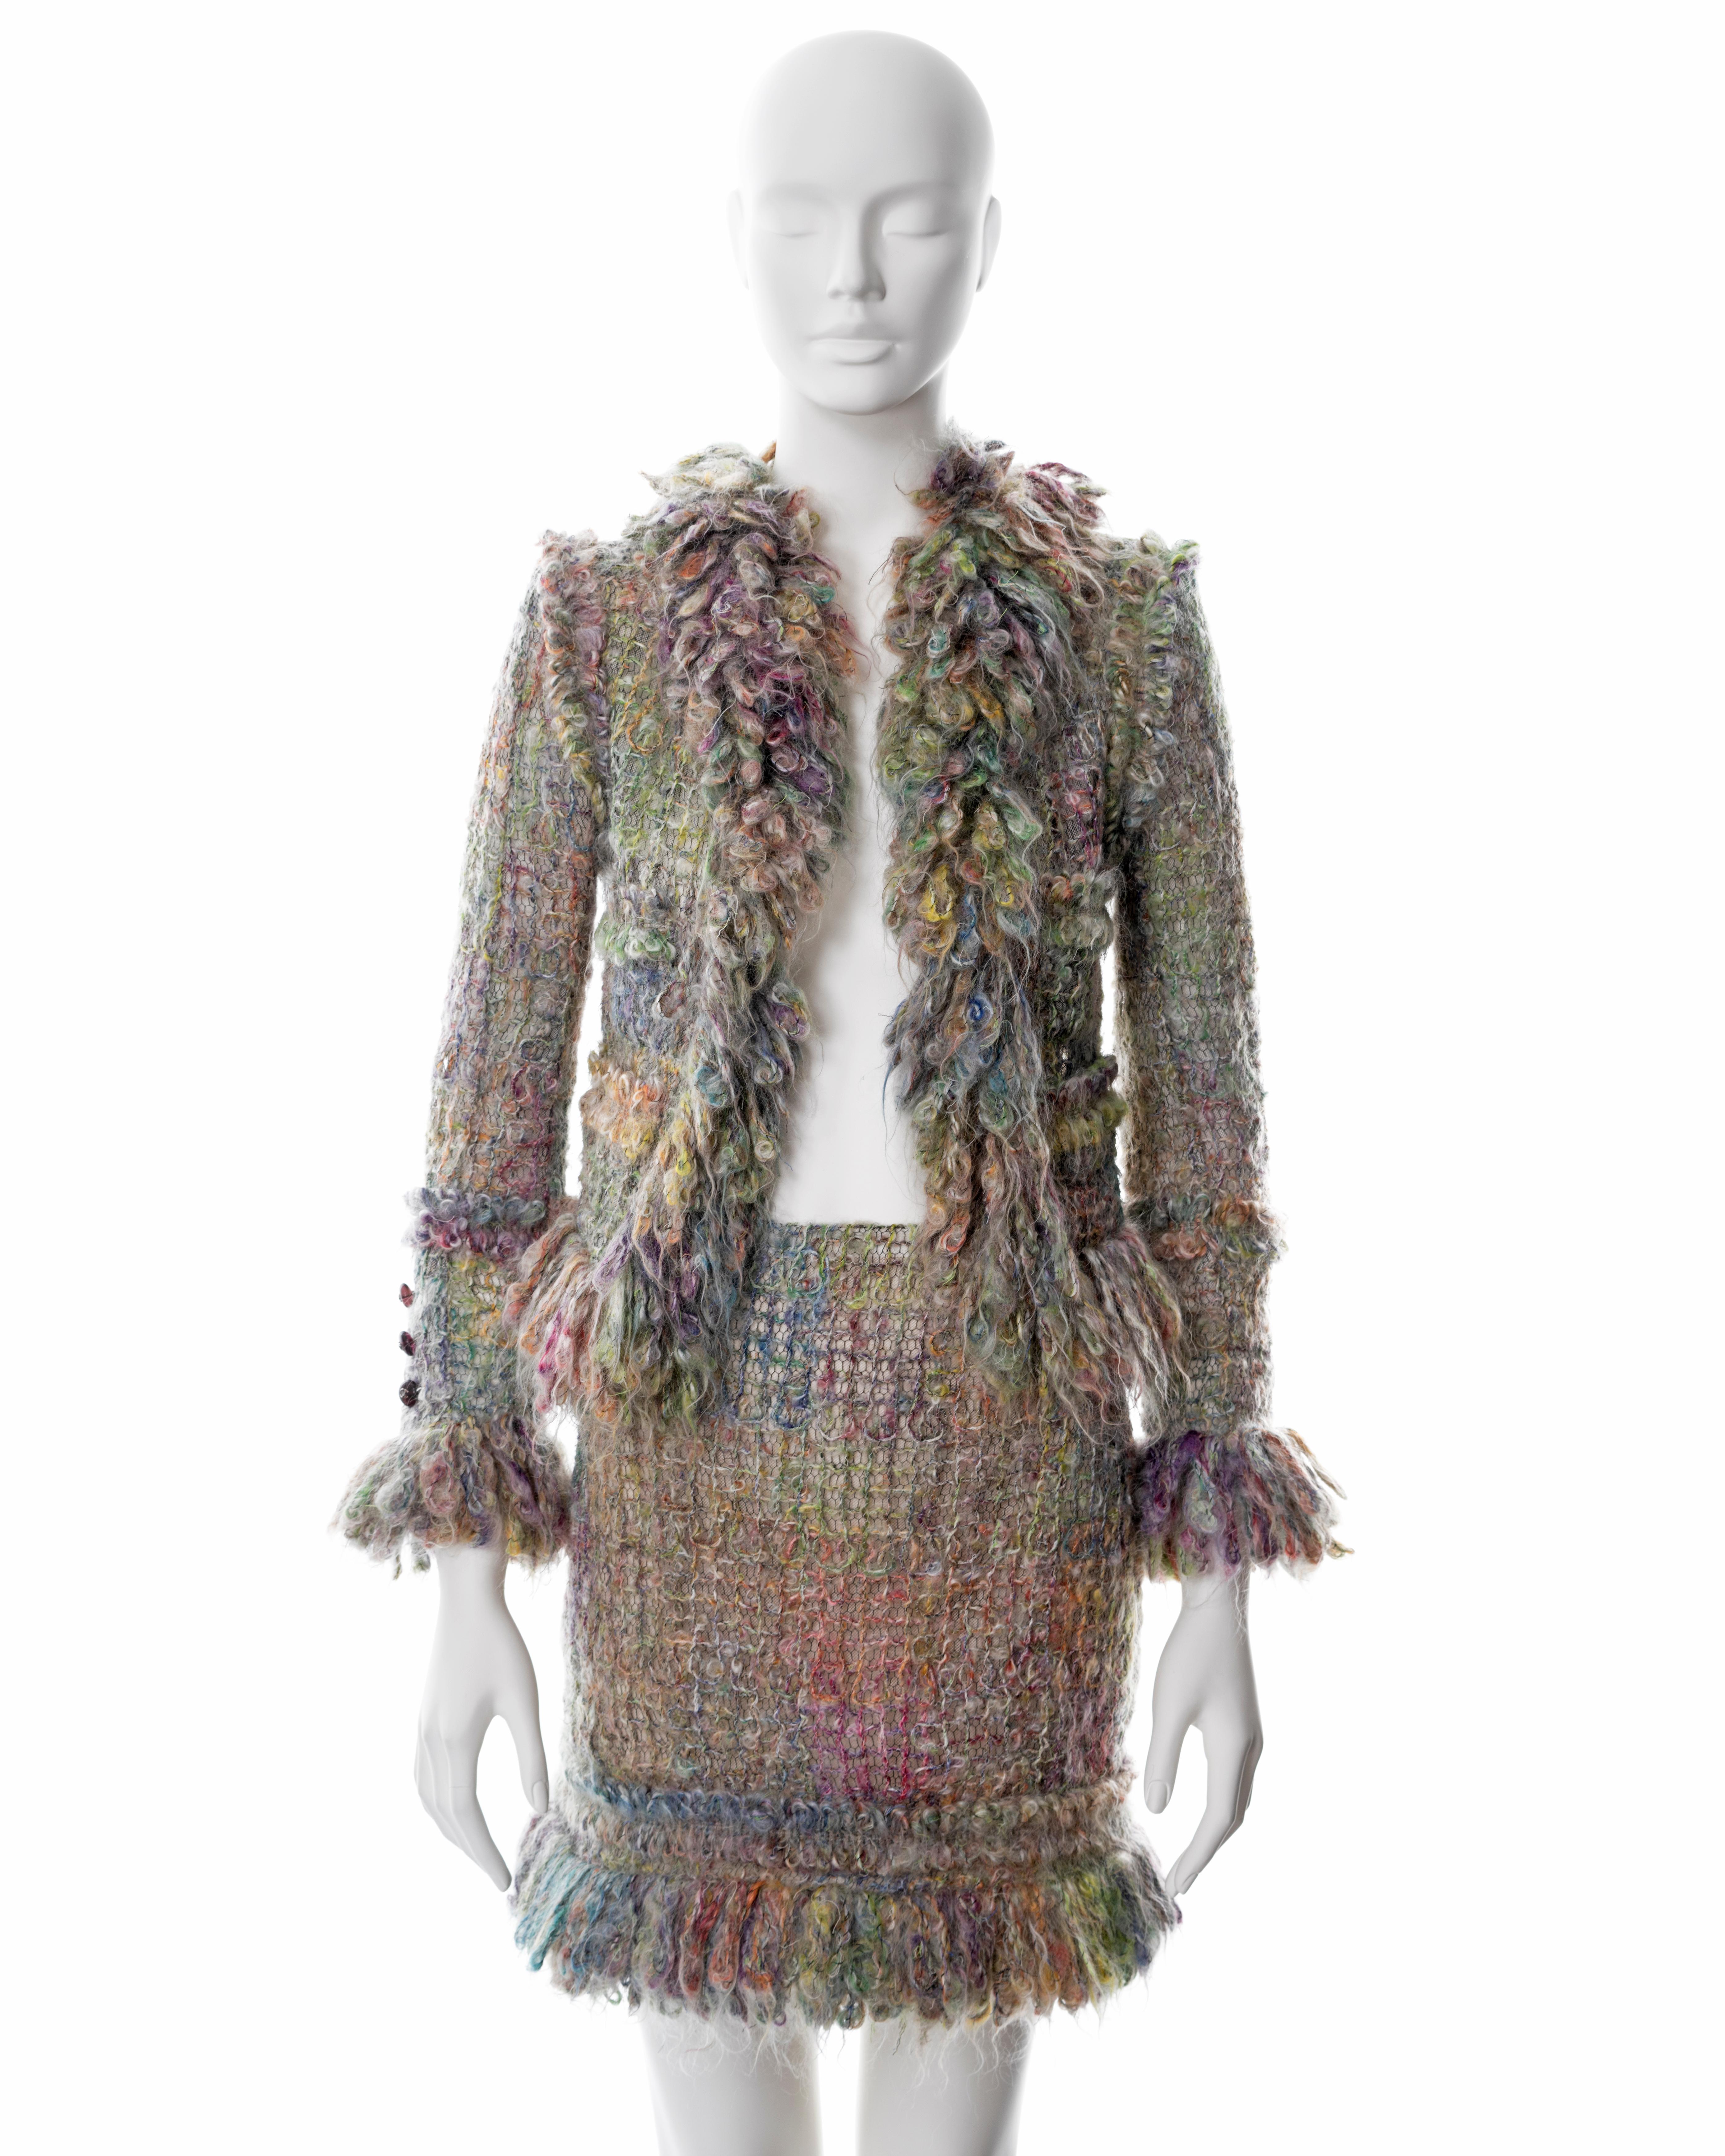 ▪ Chanel multicoloured mohair skirt suit 
▪ Designed by Karl Lagerfeld
▪ Fall-Winter 2003
▪ Constructed from a lattice of mohair and net-lace in pastels of green, pink, orange, blue and yellow 
▪ Lopped fringed trim on the collar, cuffs and skirt